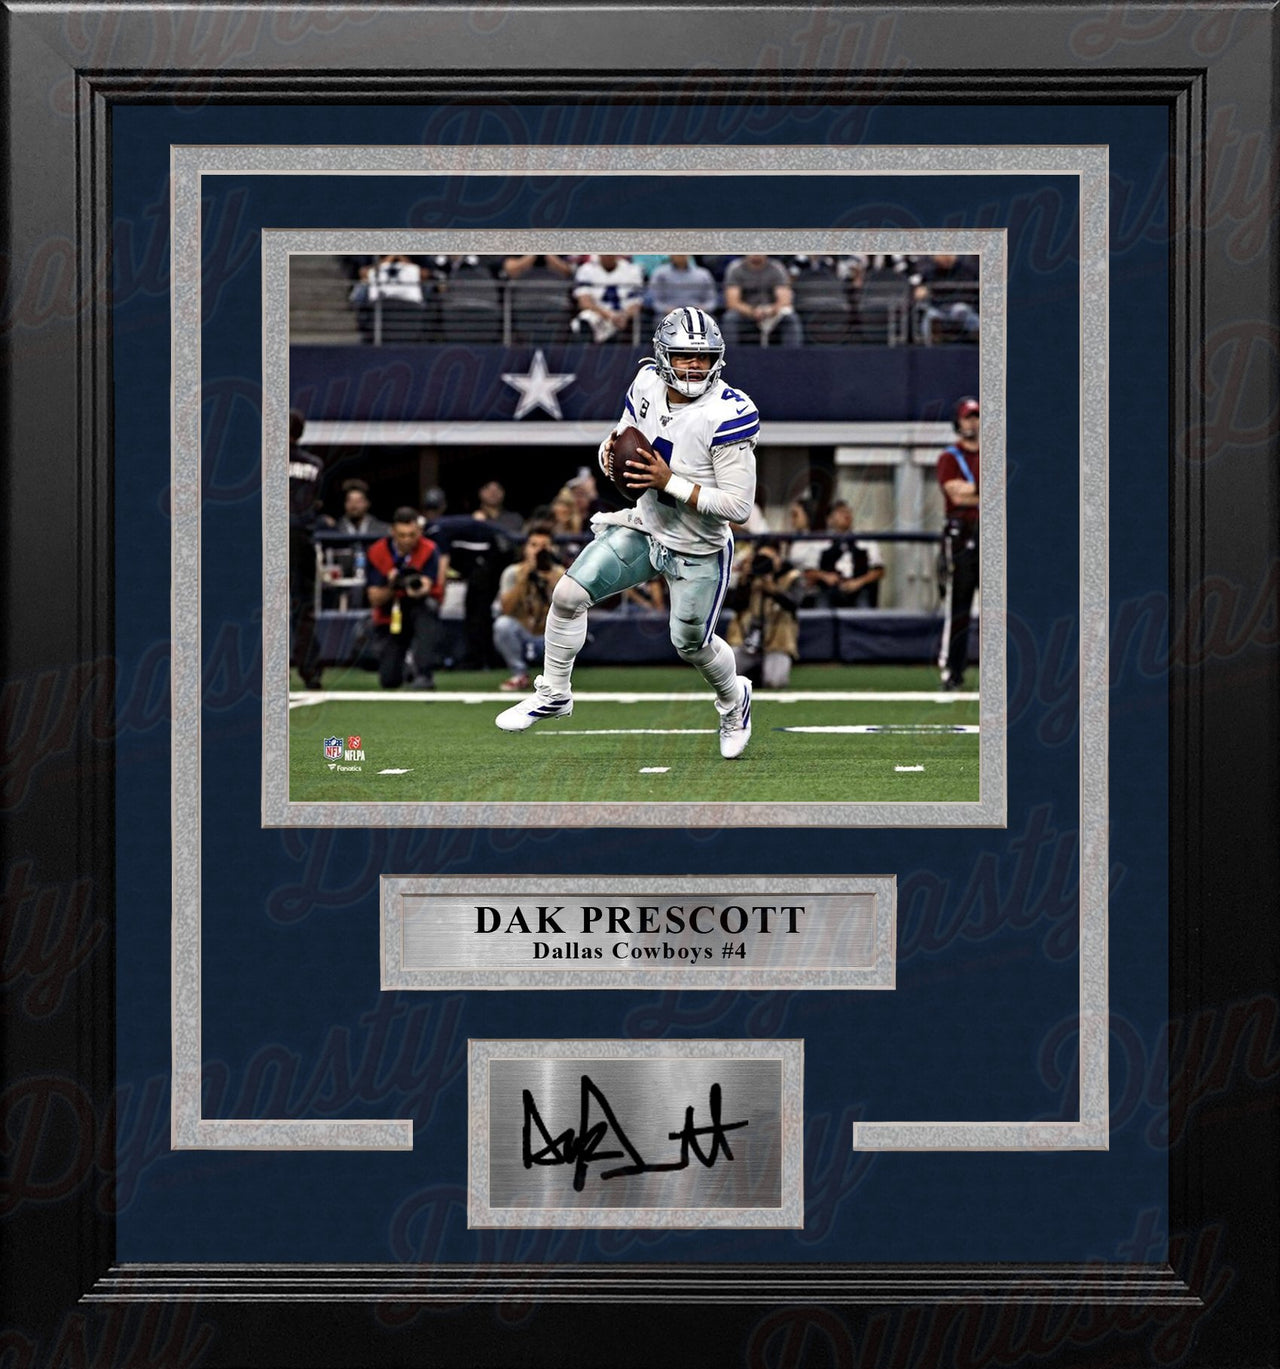 Dak Prescott in Action Dallas Cowboy 8" x 10" Framed Football Photo with Engraved Autograph - Dynasty Sports & Framing 